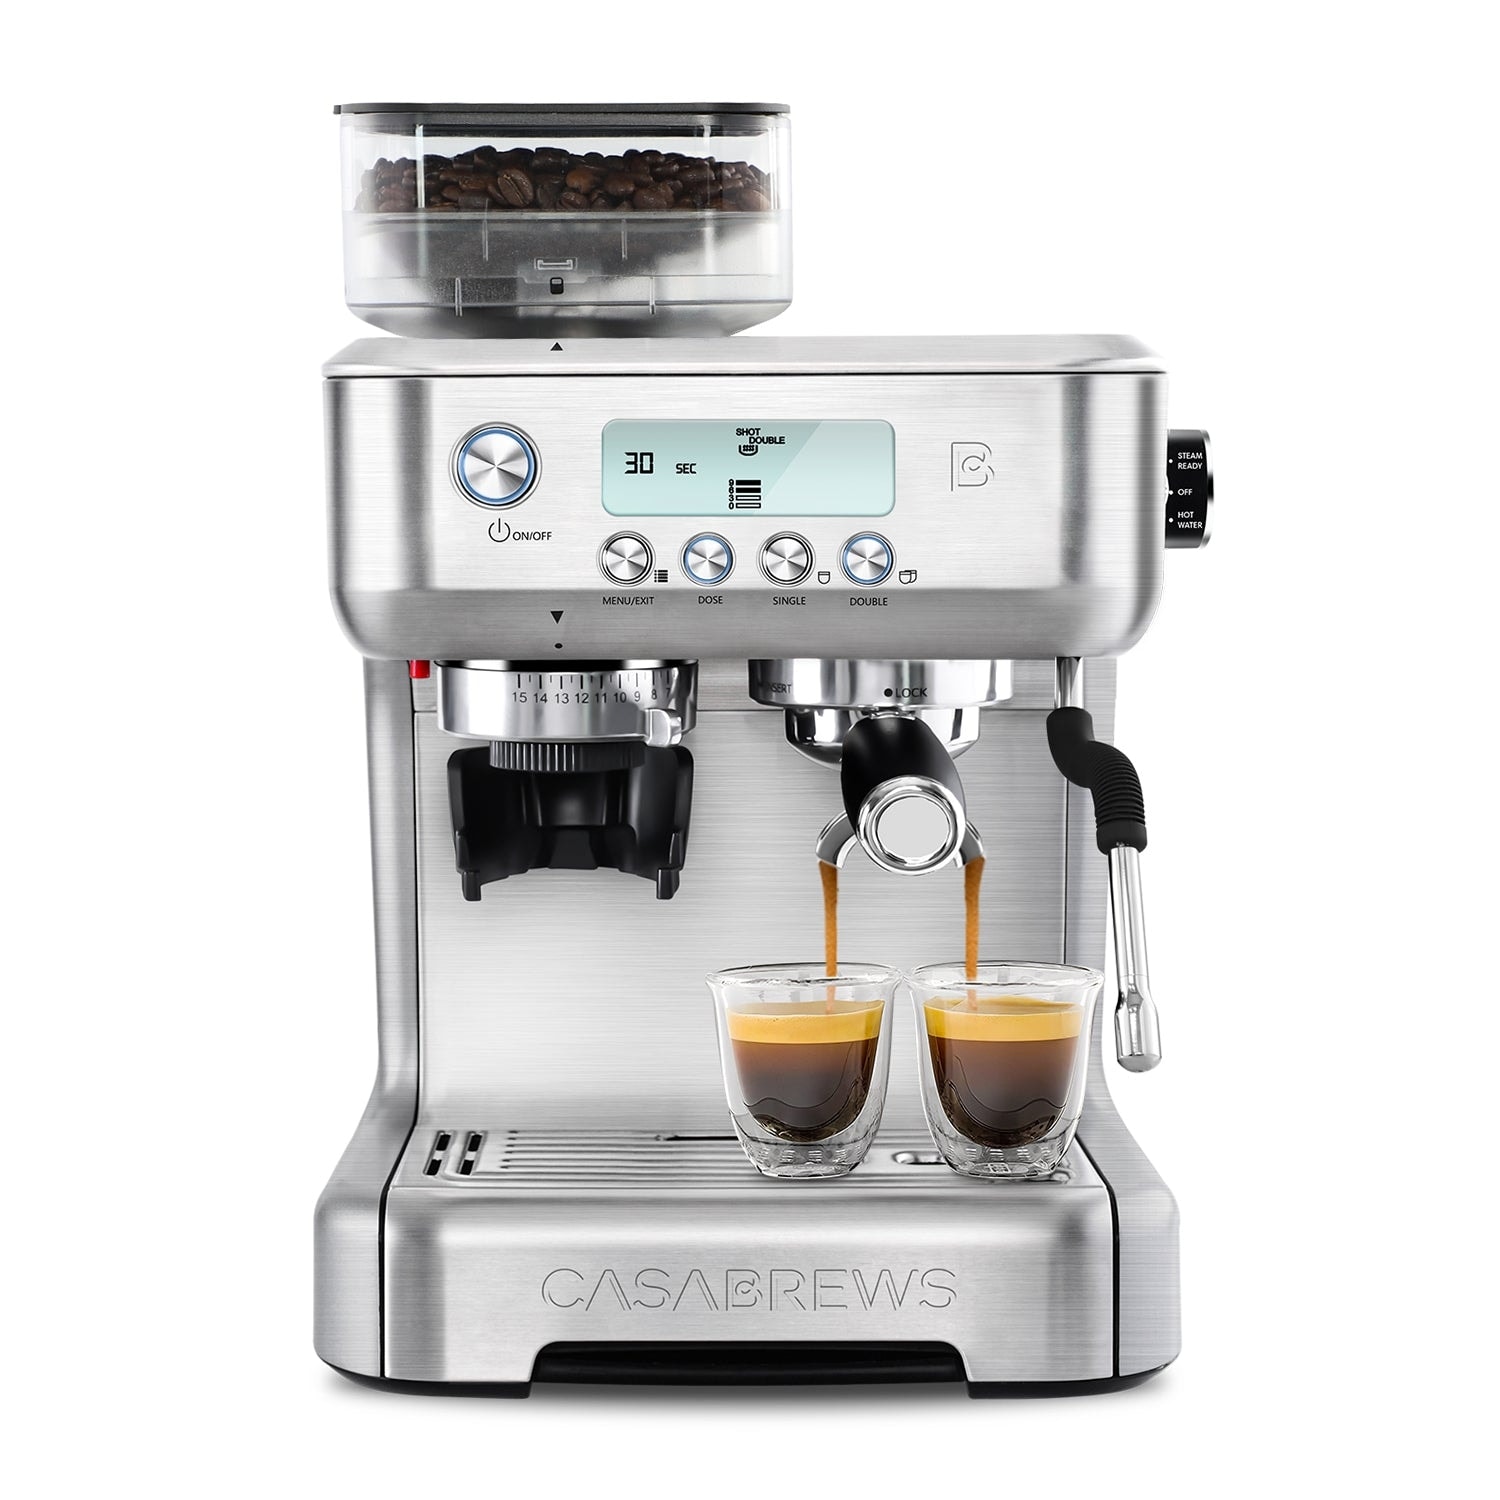 https://ak1.ostkcdn.com/images/products/is/images/direct/b7f4be5b1fc336fb2a5a643530e4d21023908f6b/Casabrews-All-in-One-Espresso-Coffee-Machine-with-Digital-Screen.jpg